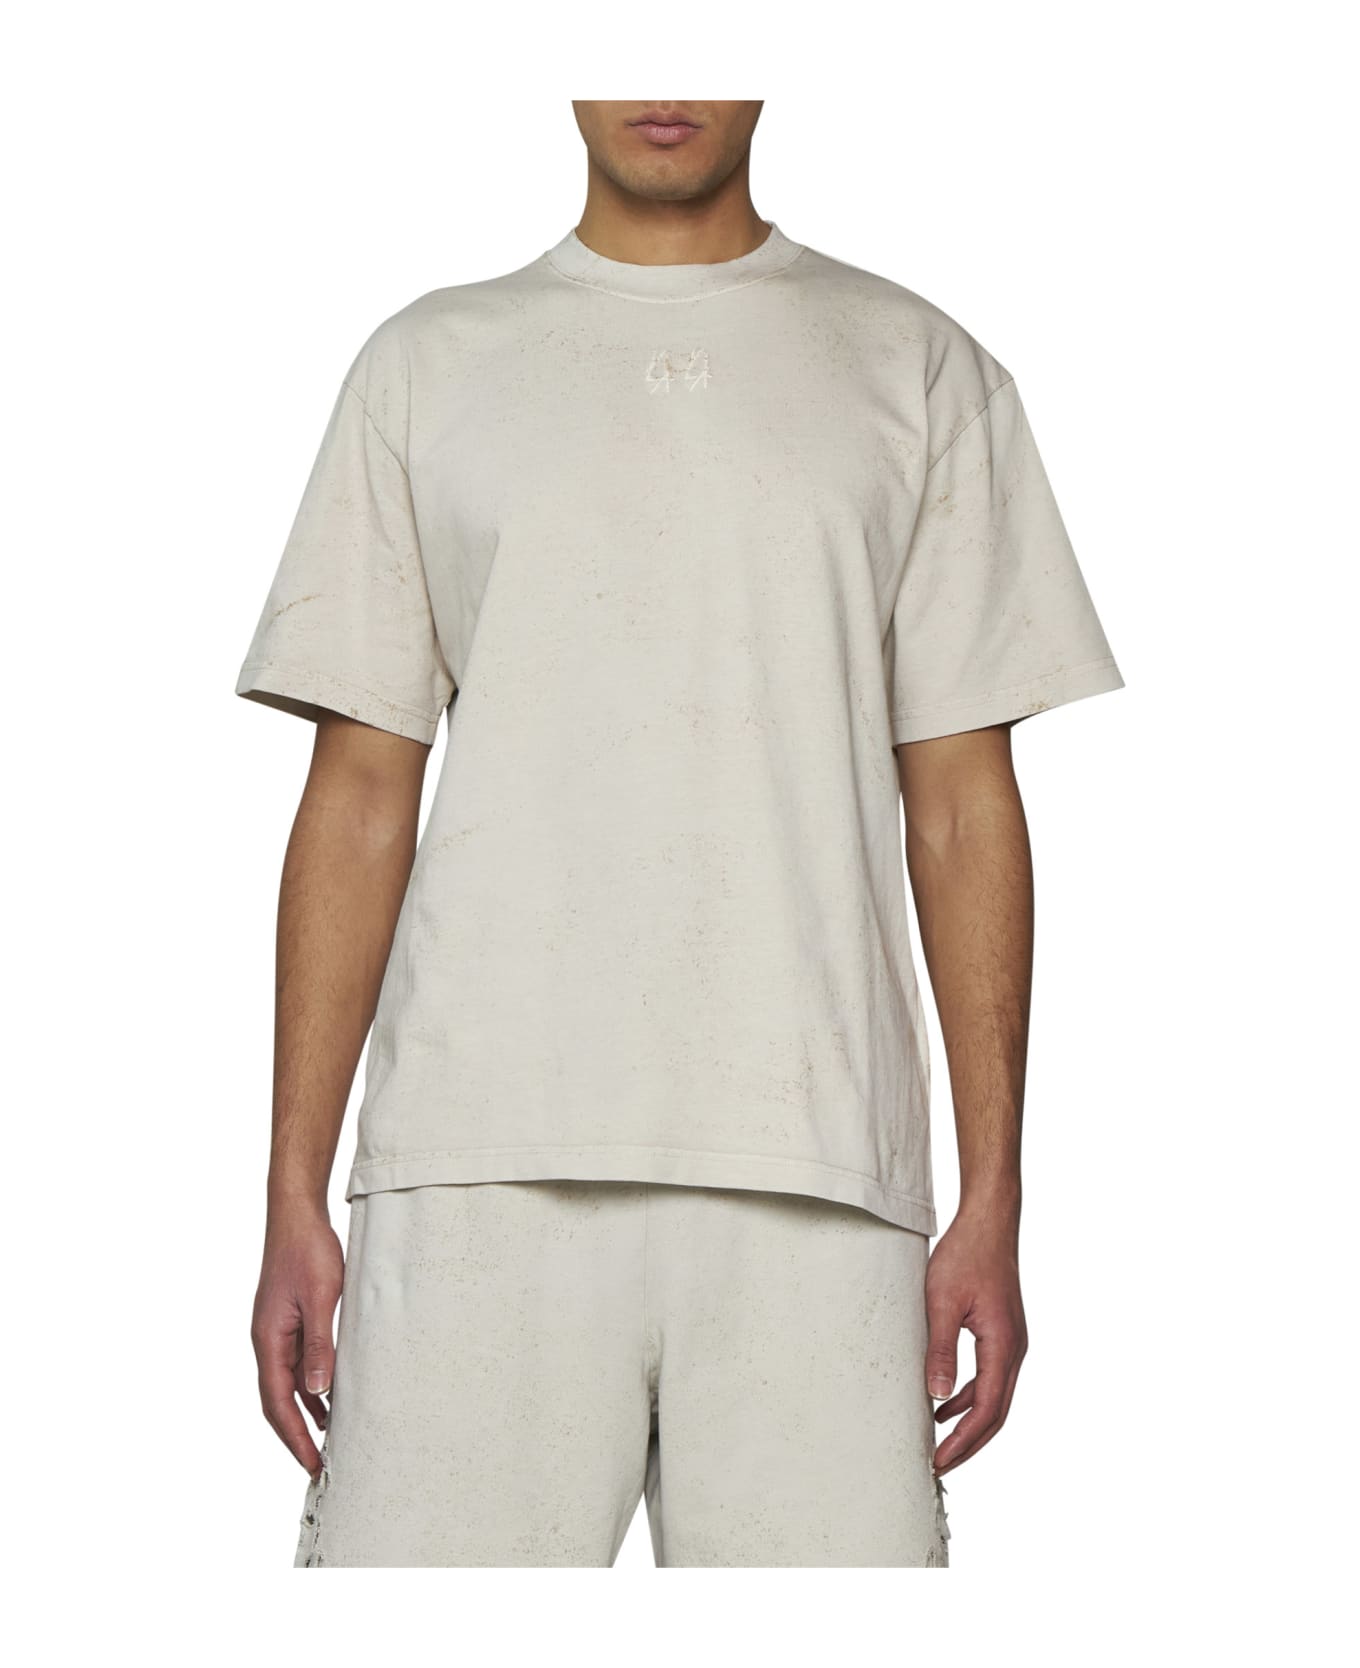 44 Label Group T-Shirt - Dirty white+gyps